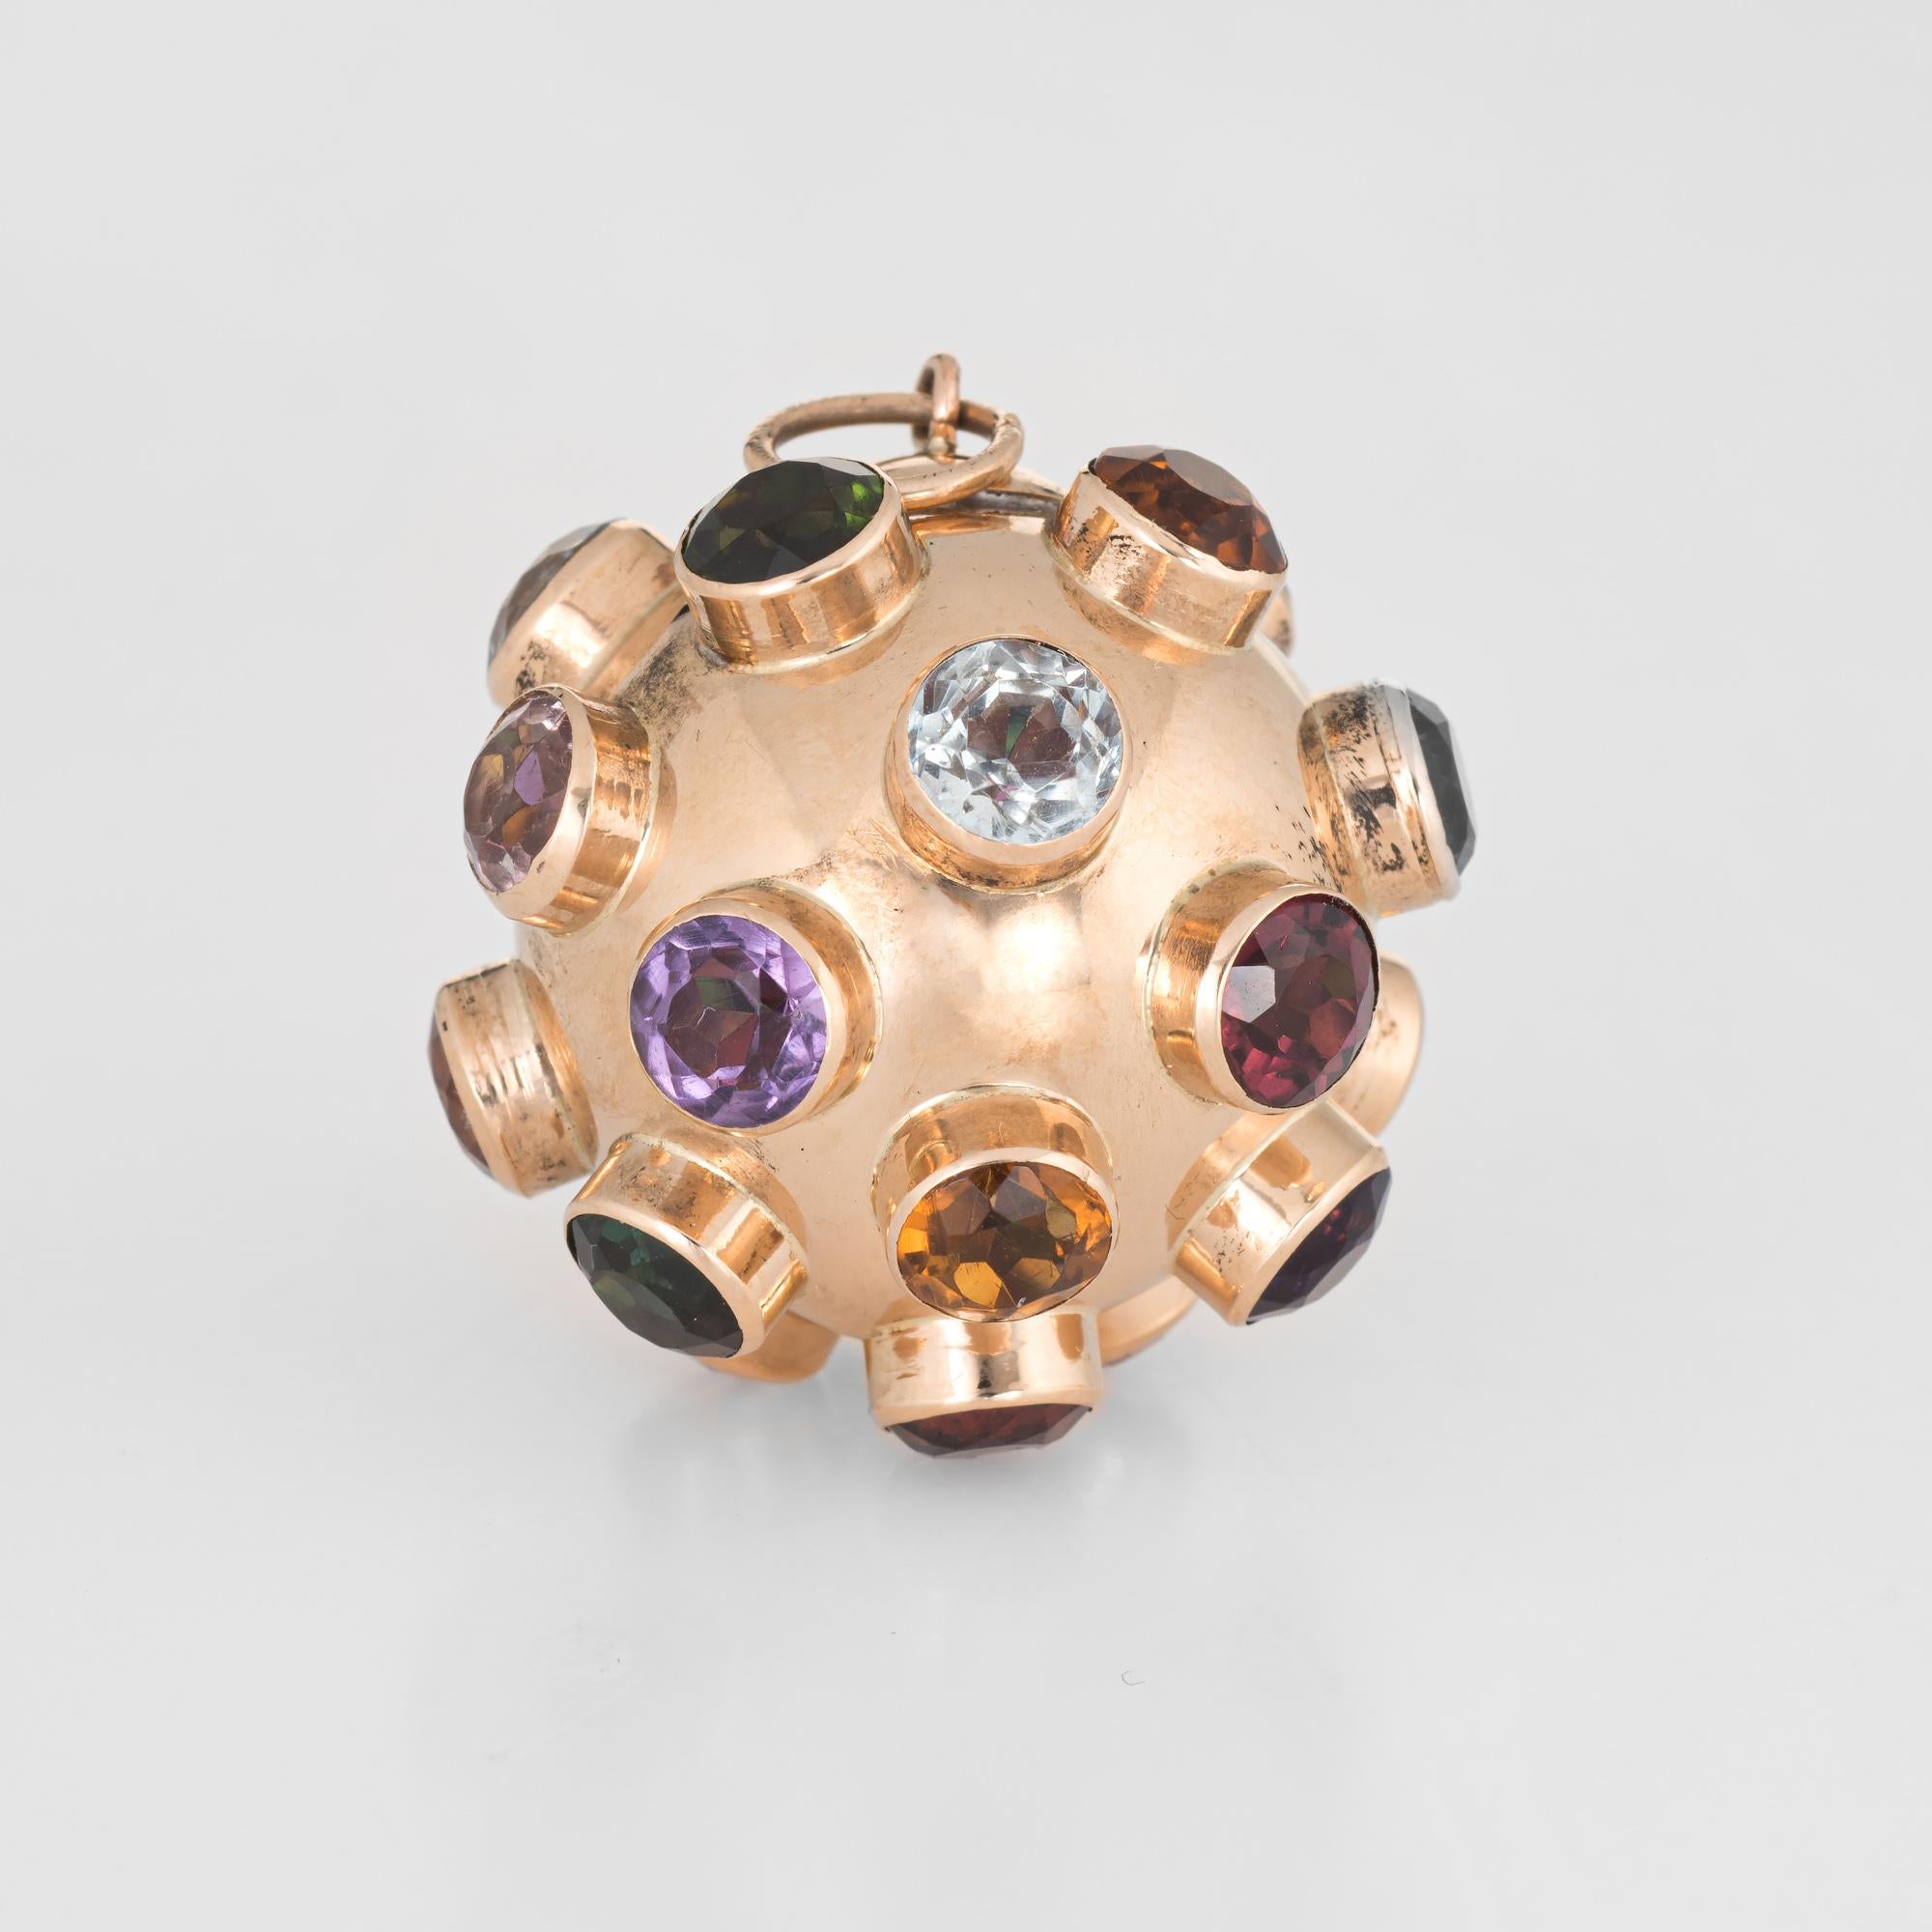 Ornate sputnik gemstone pendant (circa 1950s to 1960s) crafted in 18 karat yellow gold. 

Multi semi-precious gemstones are uniform in size each measuring 5mm (0.25 carats each). The stones include: amethyst, blue topaz, citrine and green & pink